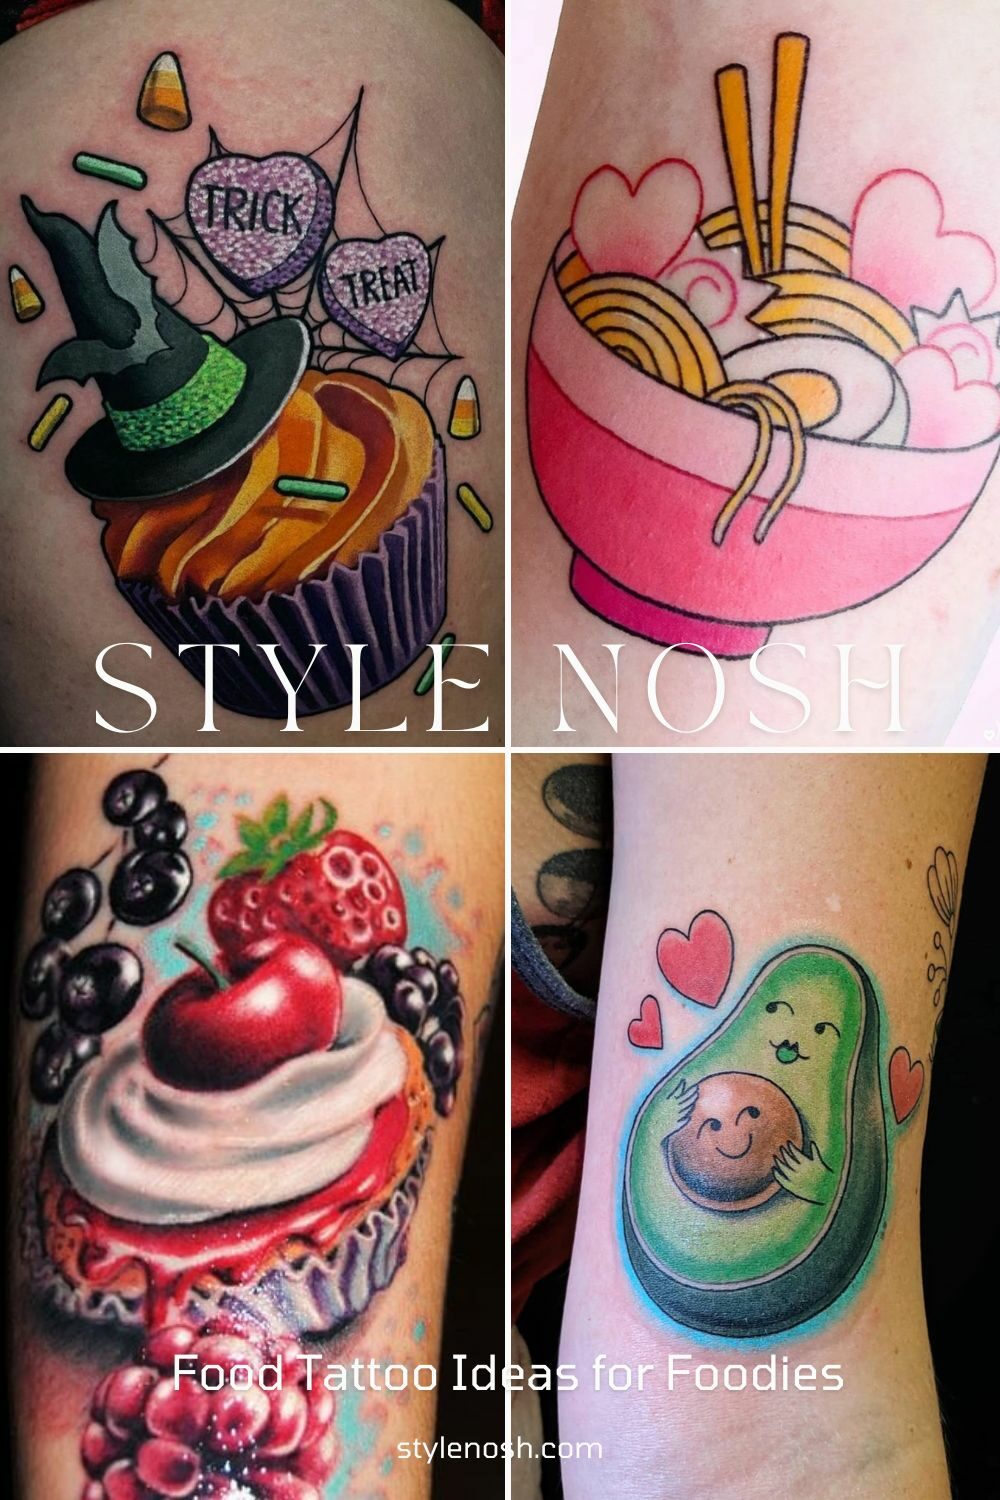 Dot your body with these amazing stylish food tattoos